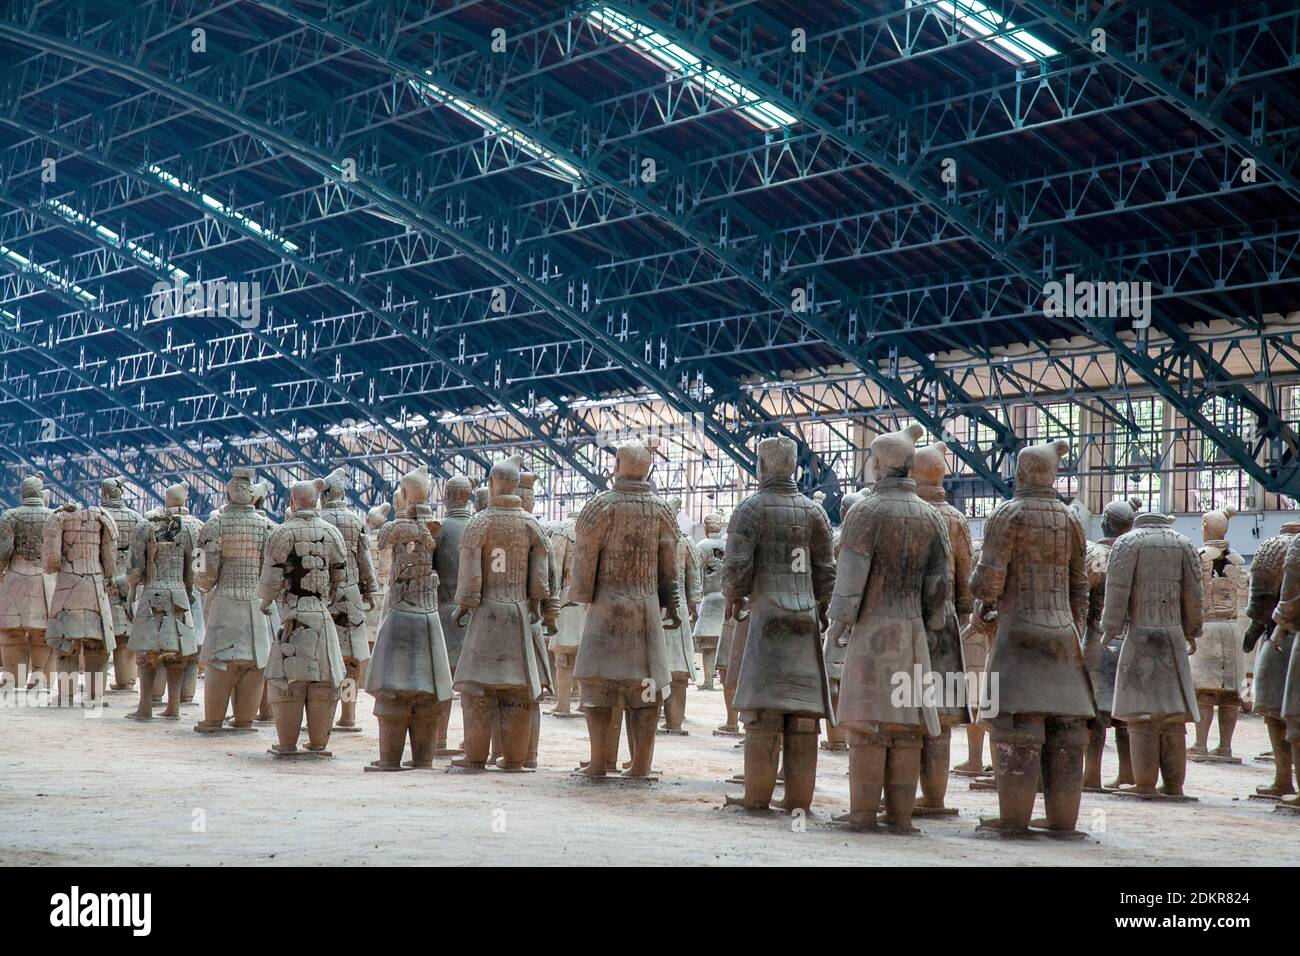 Repairing and rebuilding soldiers from the Terracotta Army warrior  sculptures depicting the armies of Qin Shi Huang, the first Emperor of China in Pi Stock Photo